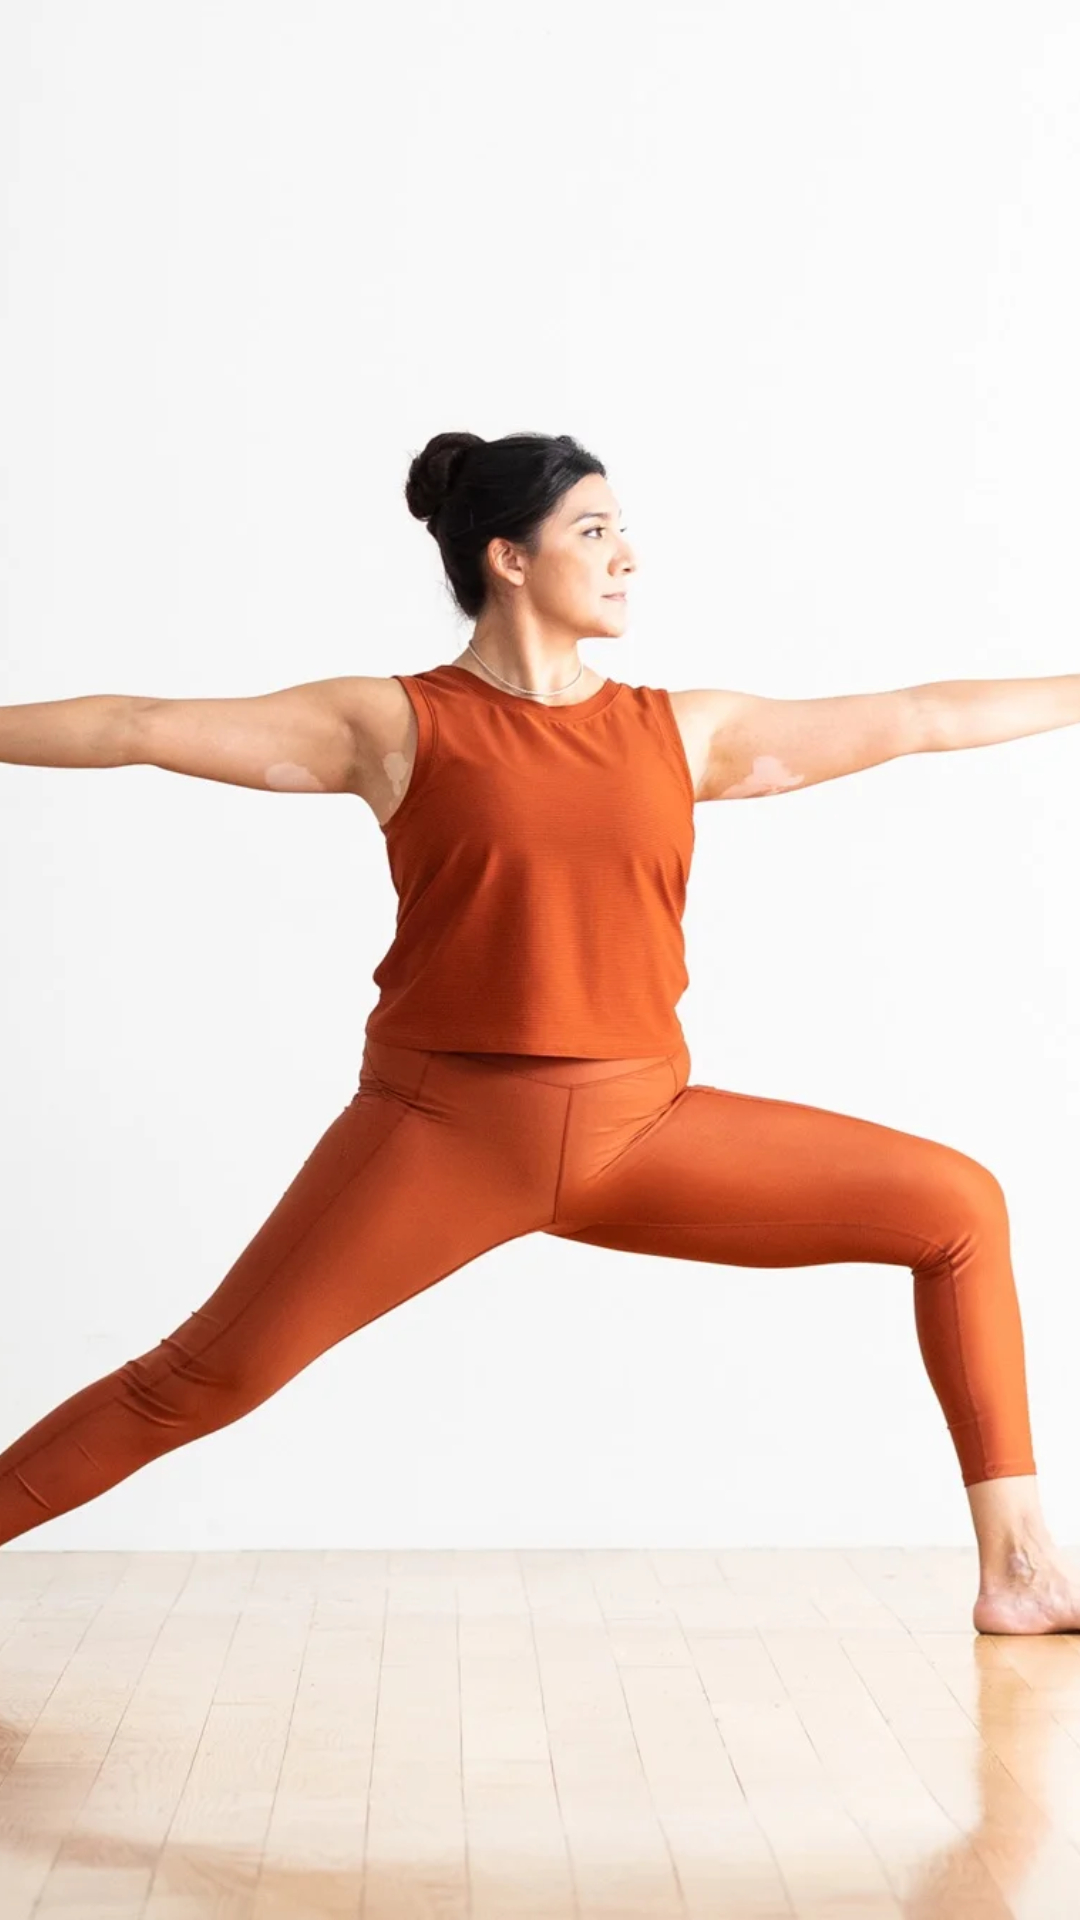 Woman Doing Yoga Pose Called Warrior 2 Arms Out Stock Photo - Image of  caucasian, female: 37987962